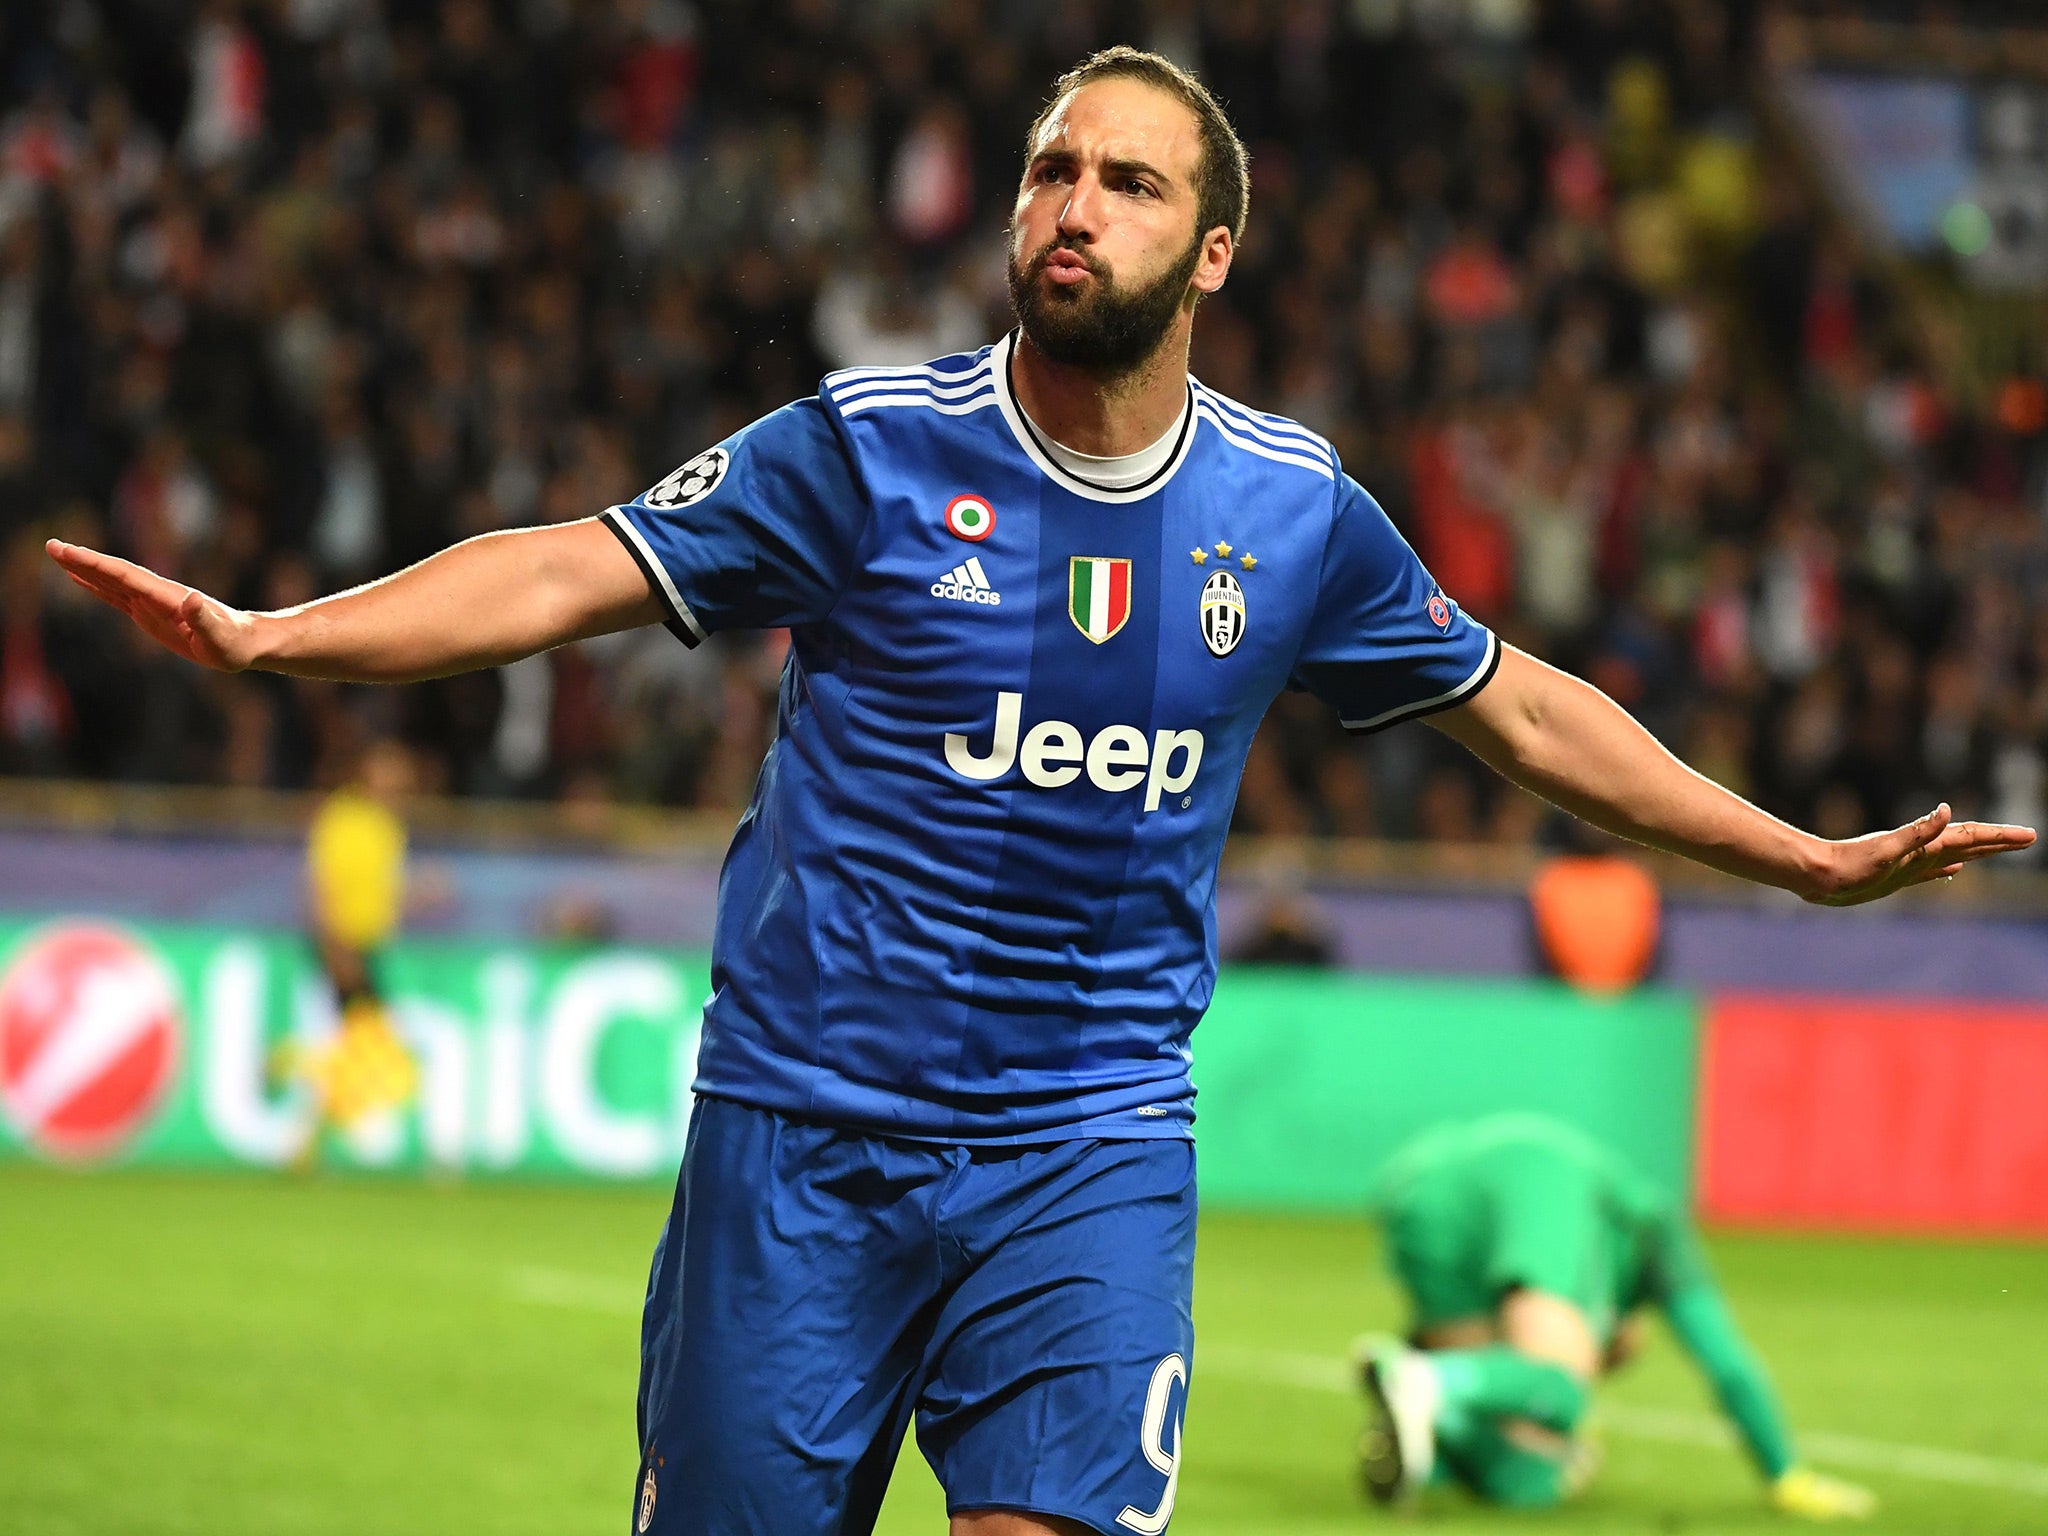 Juve knew what they were doing in signing Higuain